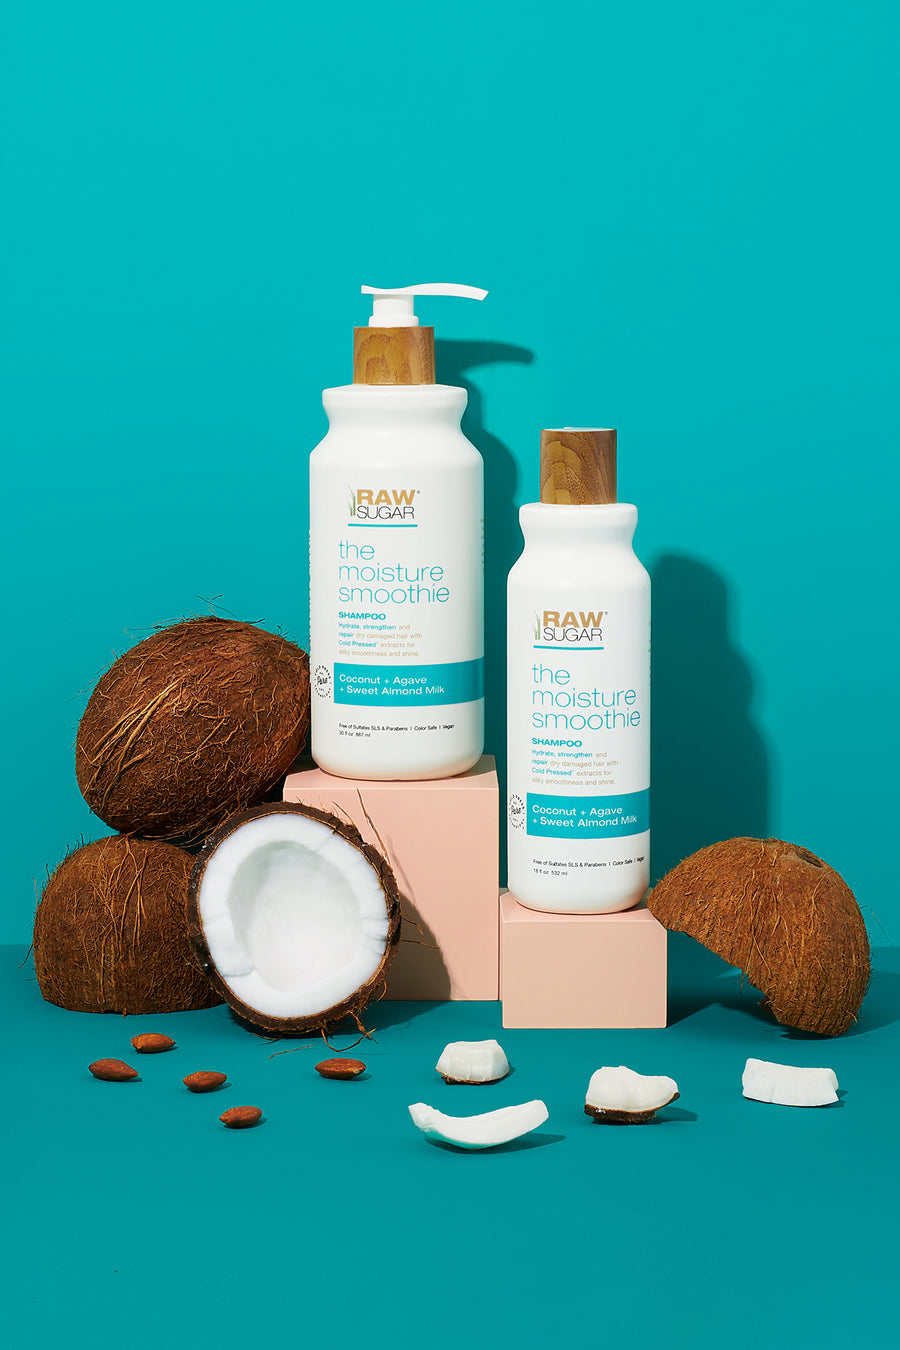 18 and 30 oz shampoos next to coconuts and almonds